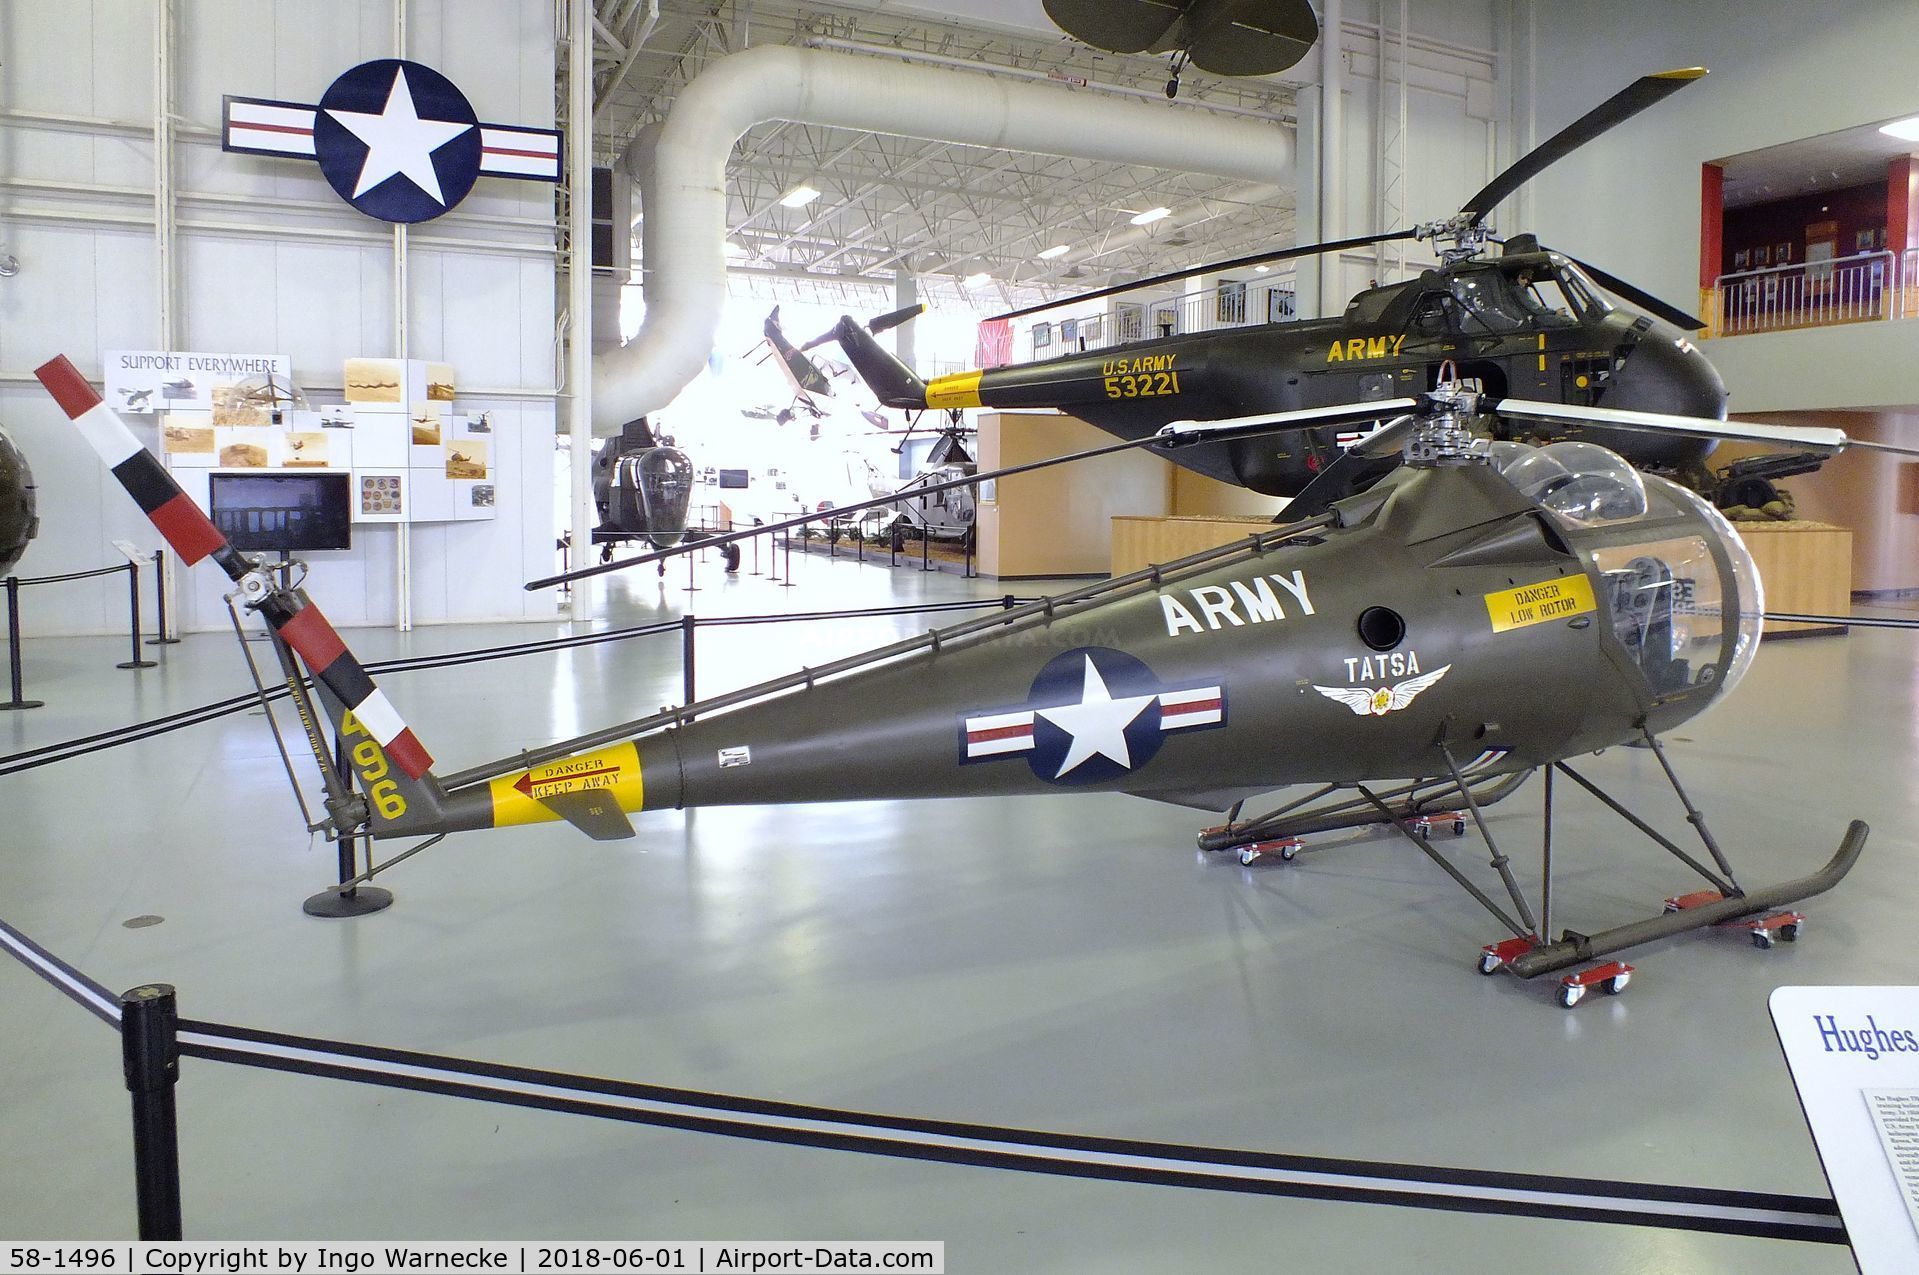 58-1496, Brantly YHO-3 C/N 63, Brantly YHO-3BR at the US Army Aviation Museum, Ft. Rucker